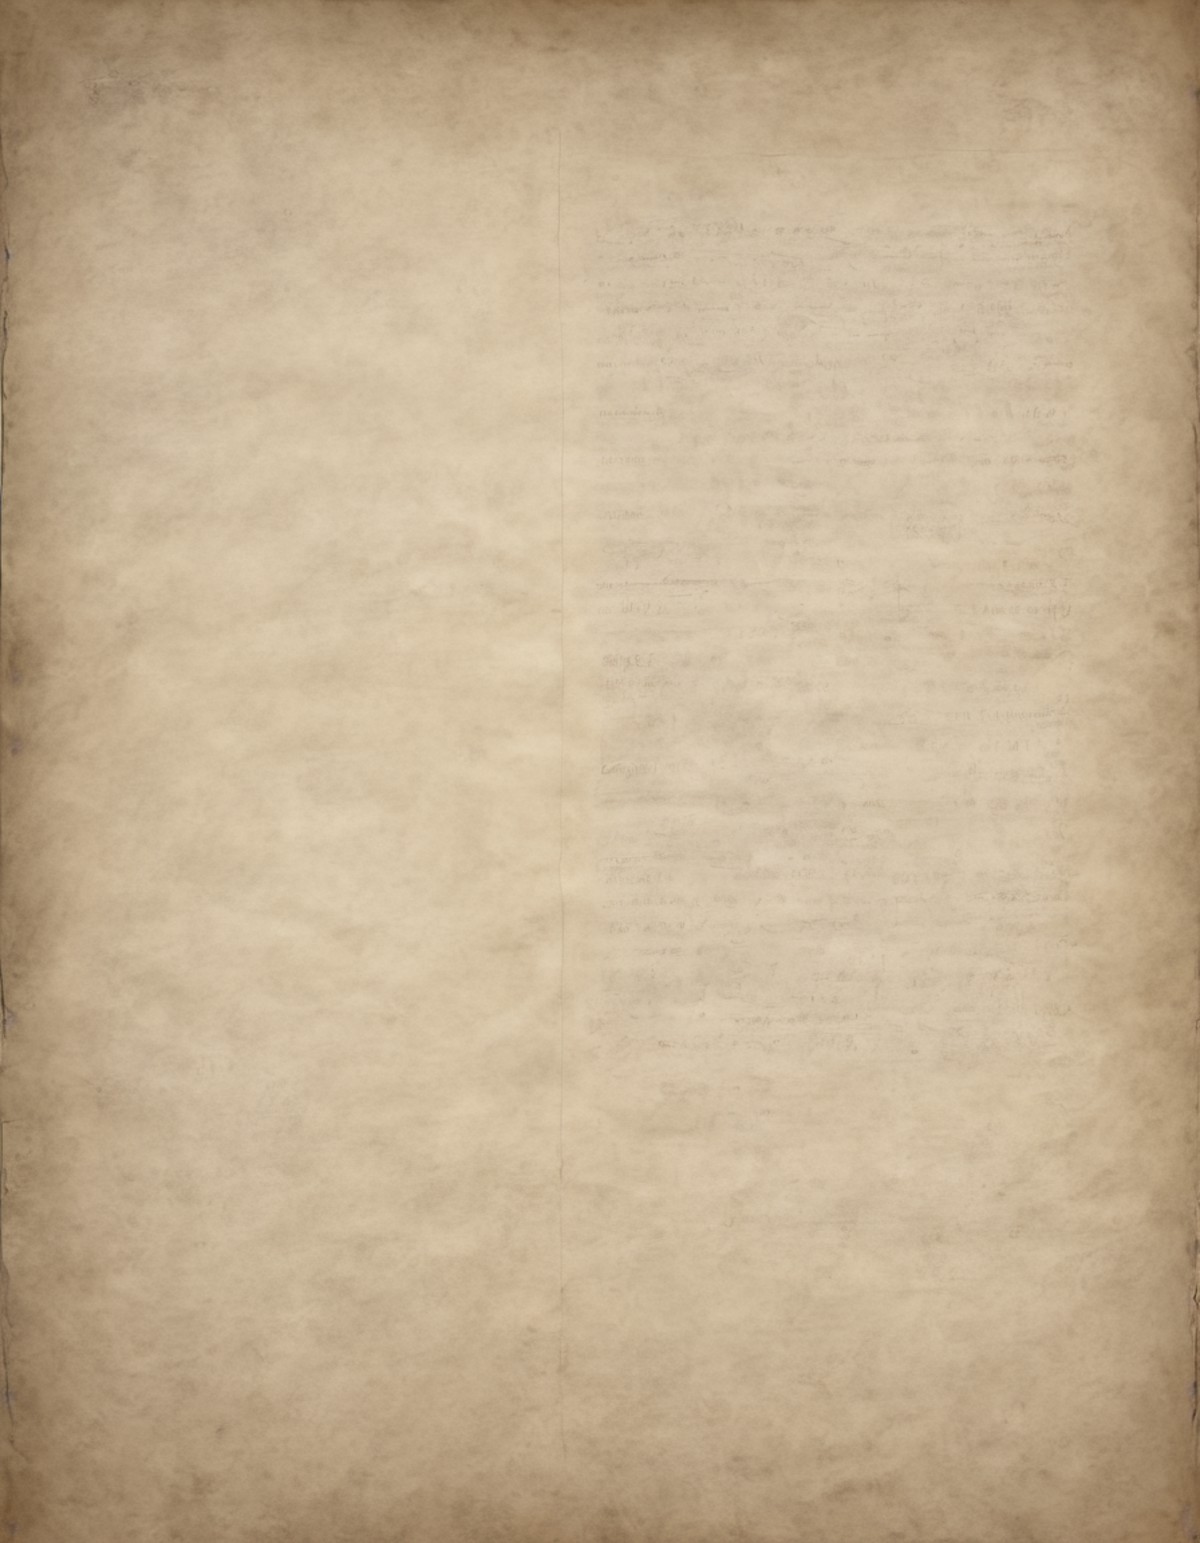 a blank sheet of mottled parchment with ghost lettering and annotation